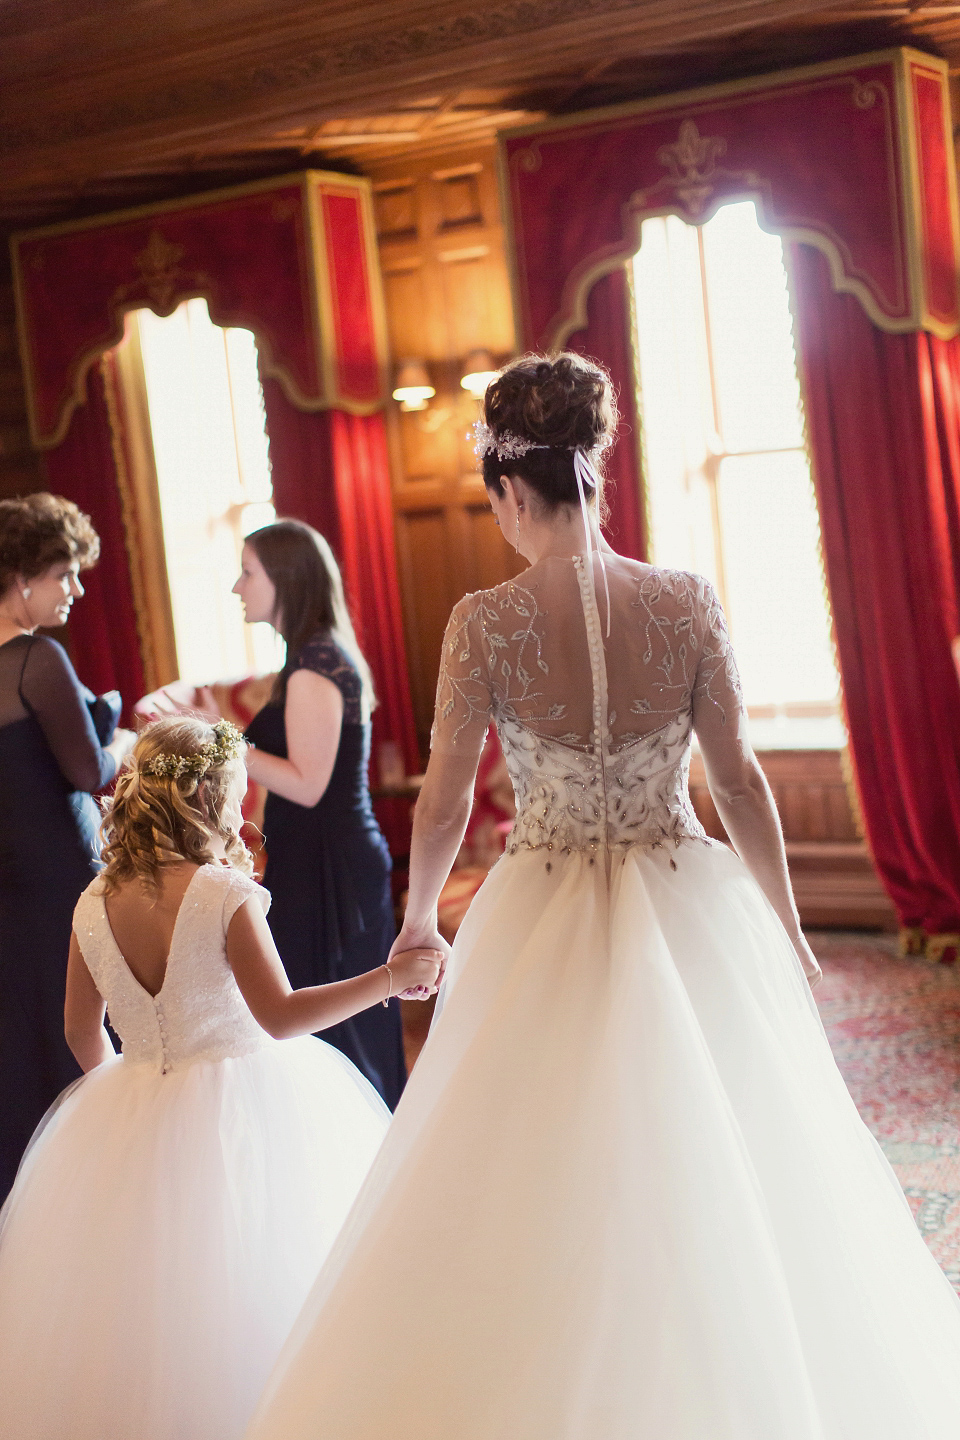 Juliana of Good Juju Ink wears a Marchesa gown for her super tasteful and elegant fairy tale Celtic and Jewish fusion wedding at Ashford Castle. Photography by Craig & Eva Sanders.